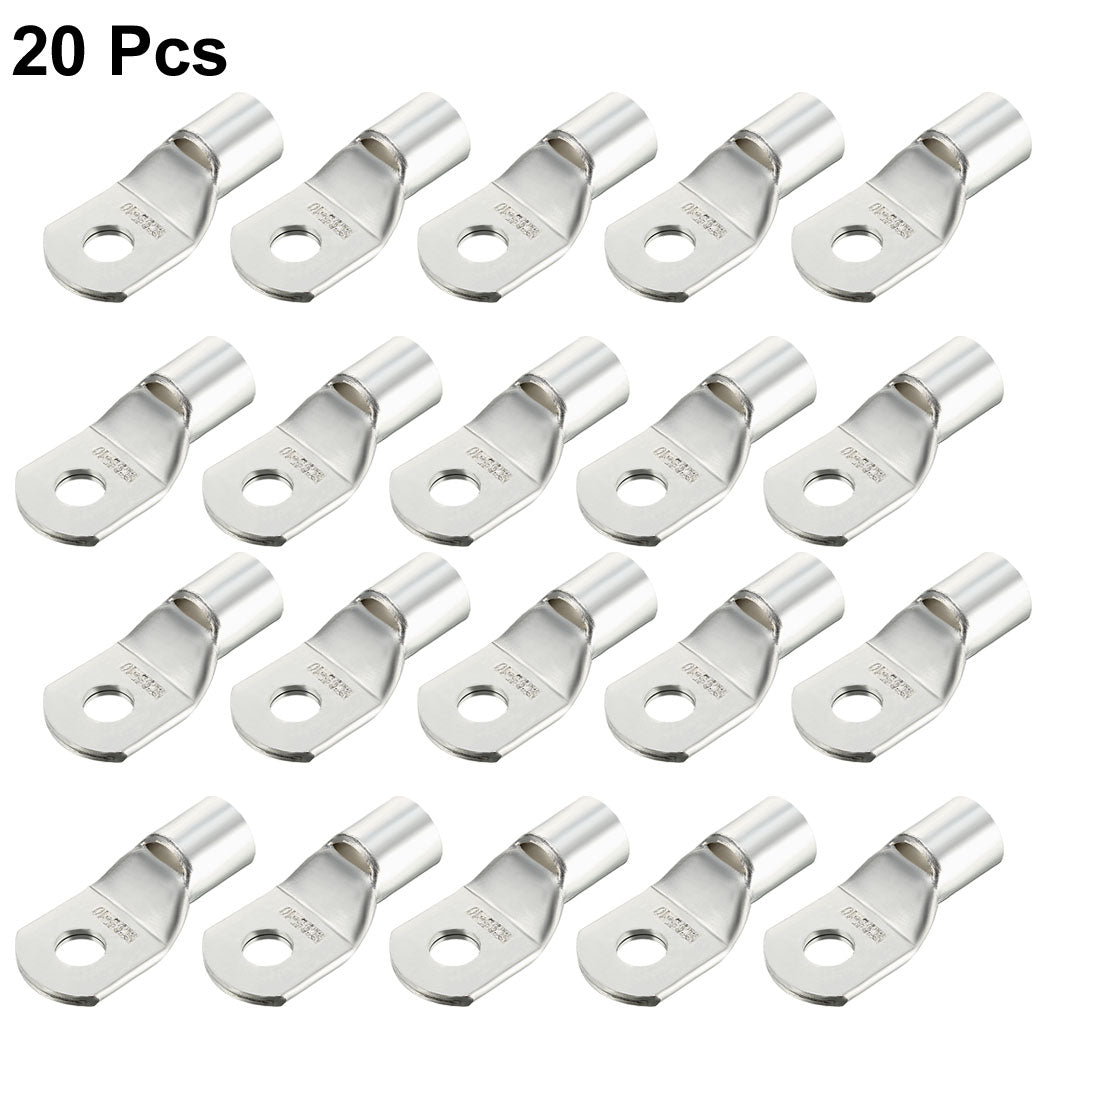 uxcell Uxcell 20Pcs SC95-10 Non-Insulated U-Type Copper Crimp Terminals 95mm2 Wire Connector Silver Tone